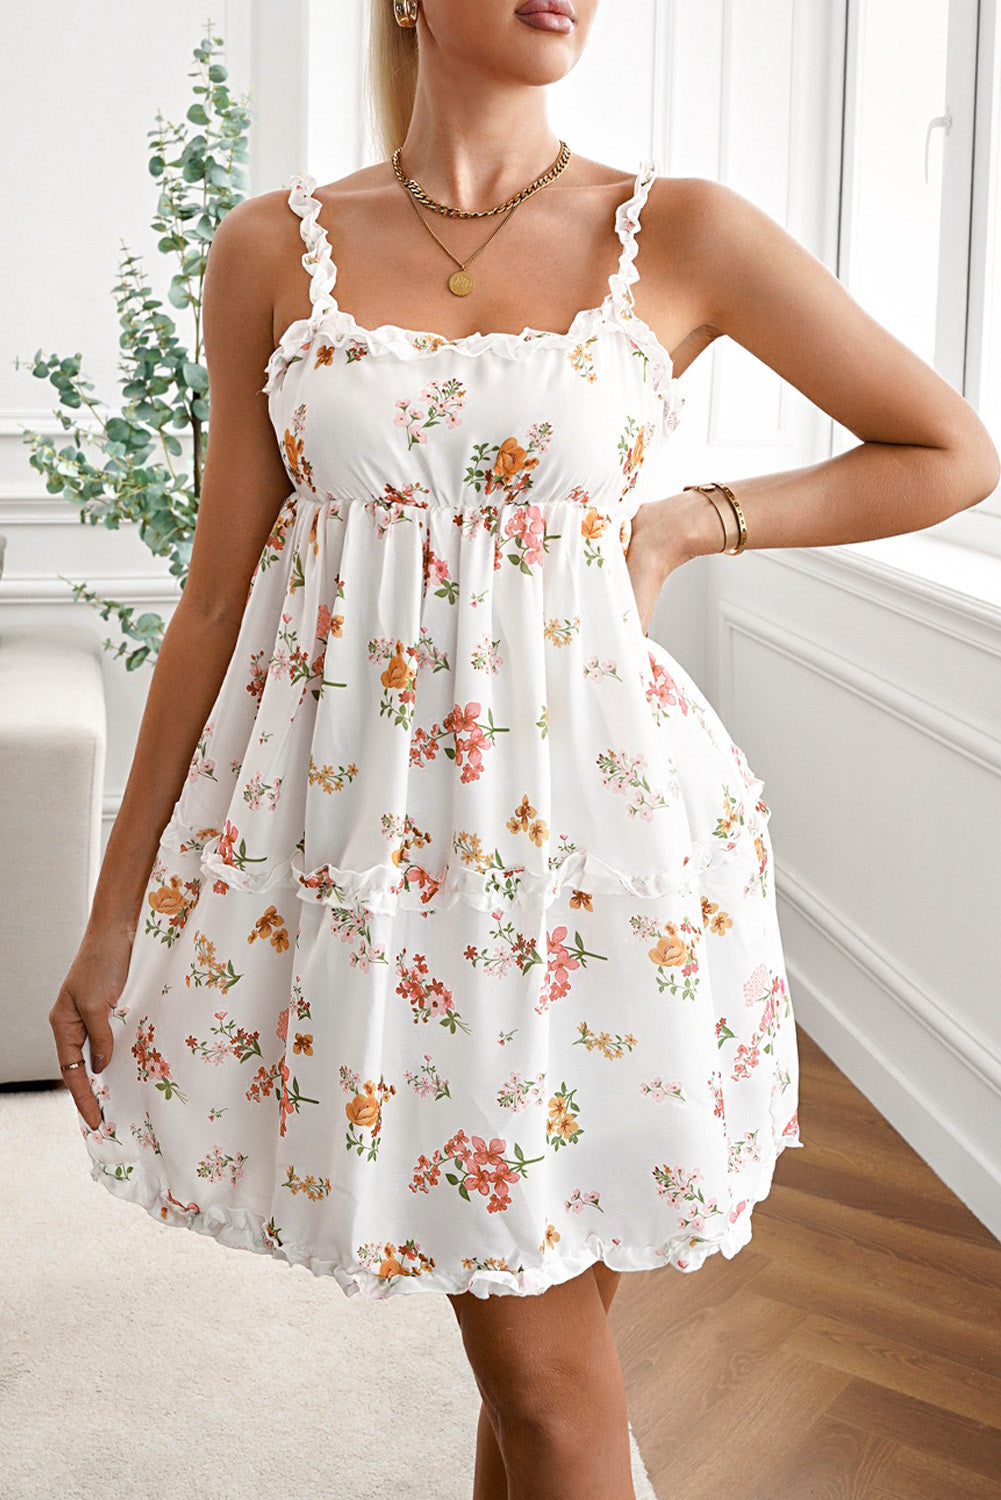 Sleeveless Ruffle Backless Knot Floral Dress for summer.

Shop for your floral #sundress via Alelly!

Use code BRIANABOOKER for 15% off @alellyofficial !